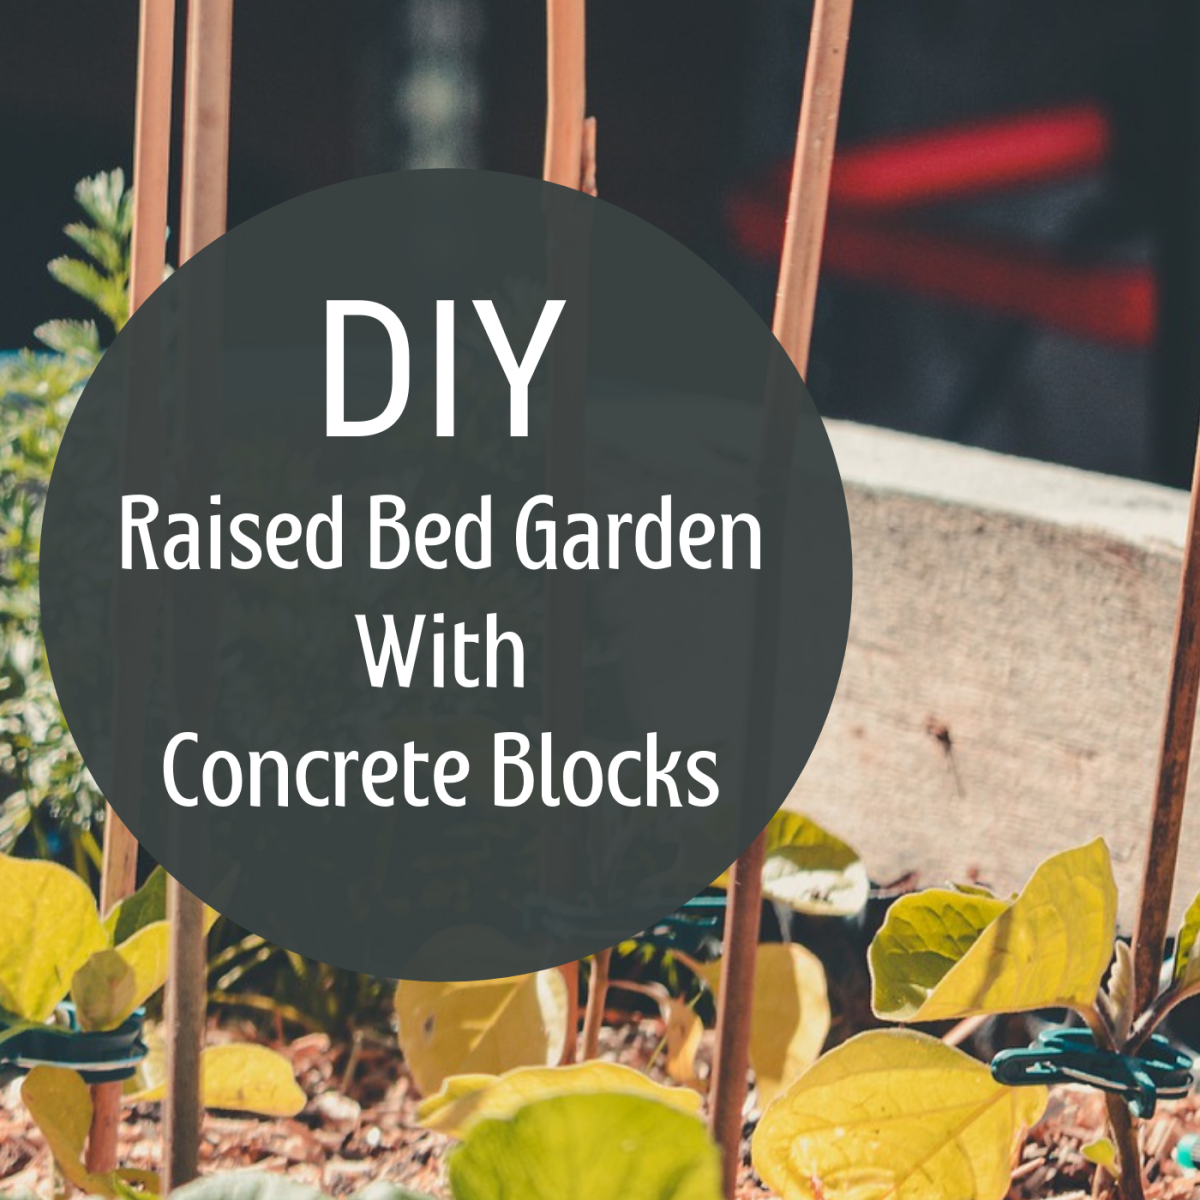 Try out this easy DIY project for building a raised-bed garden out of concrete blocks.